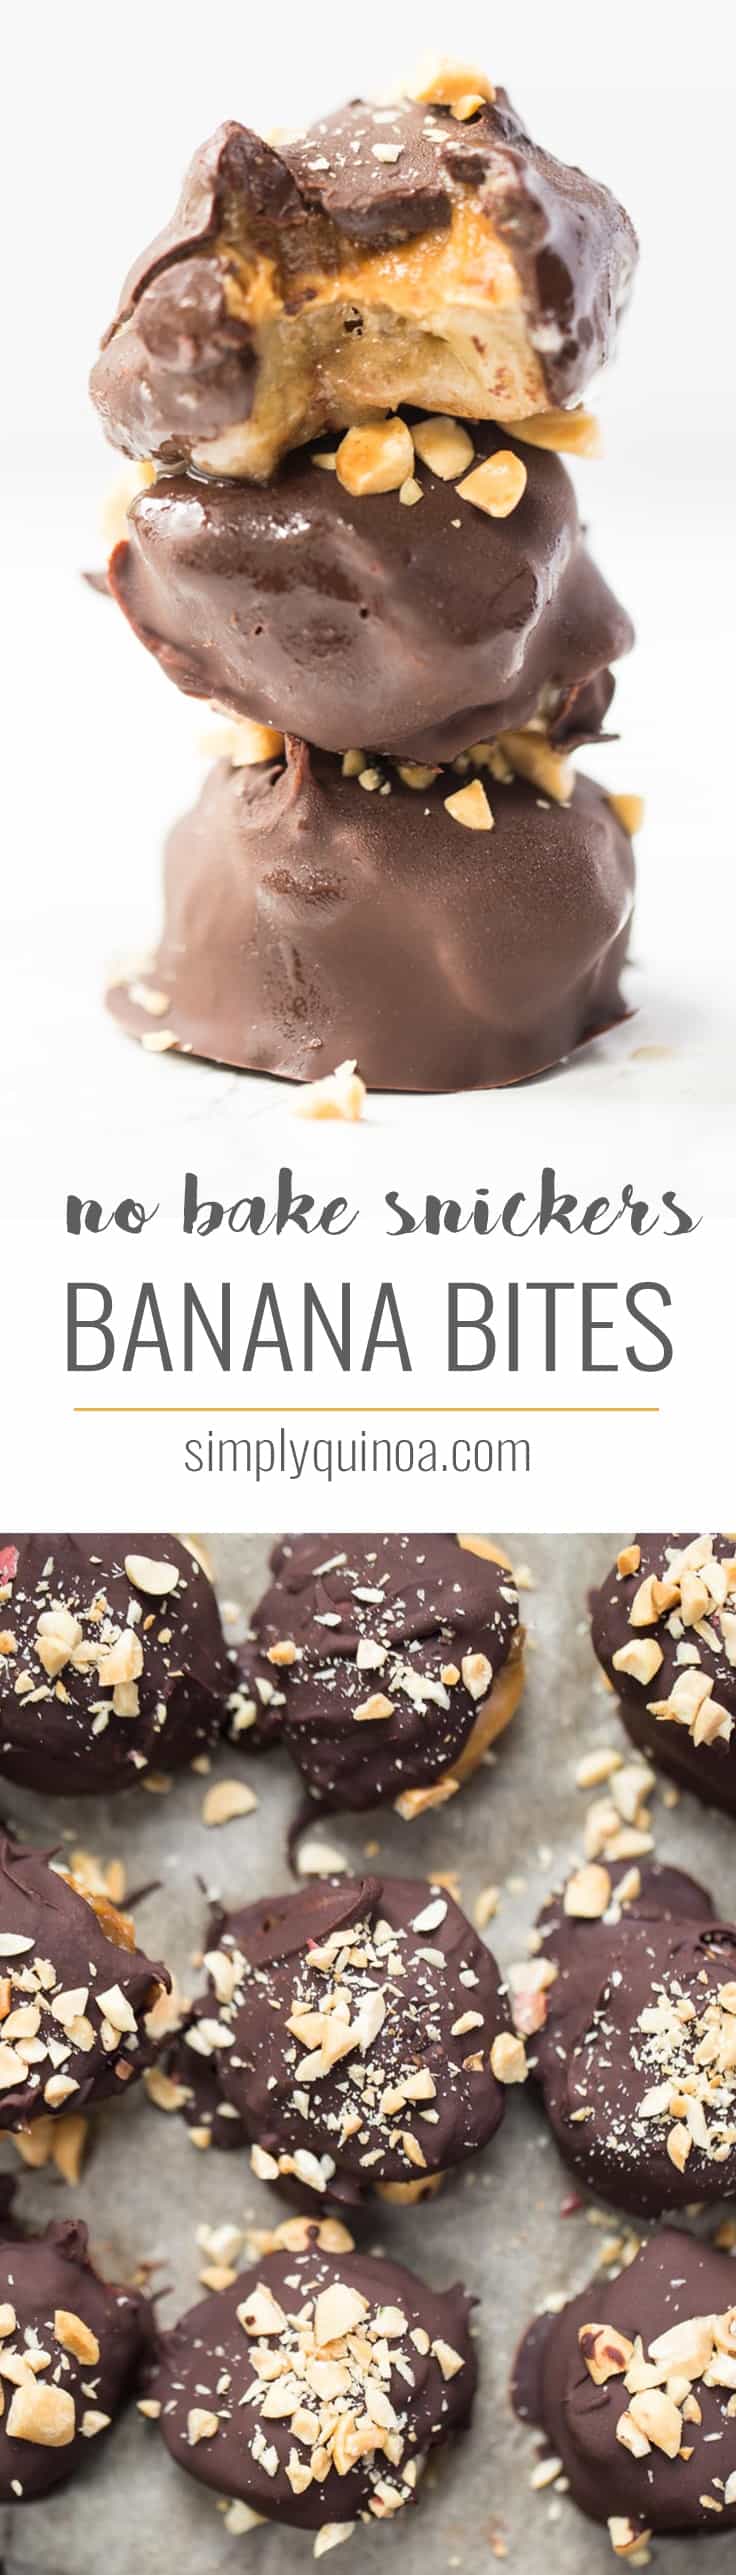 How to make SNICKERS BANANA BITES with just 5 ingredients! Easy to make, NO BAKE and they taste amazing! [vegan + gf]